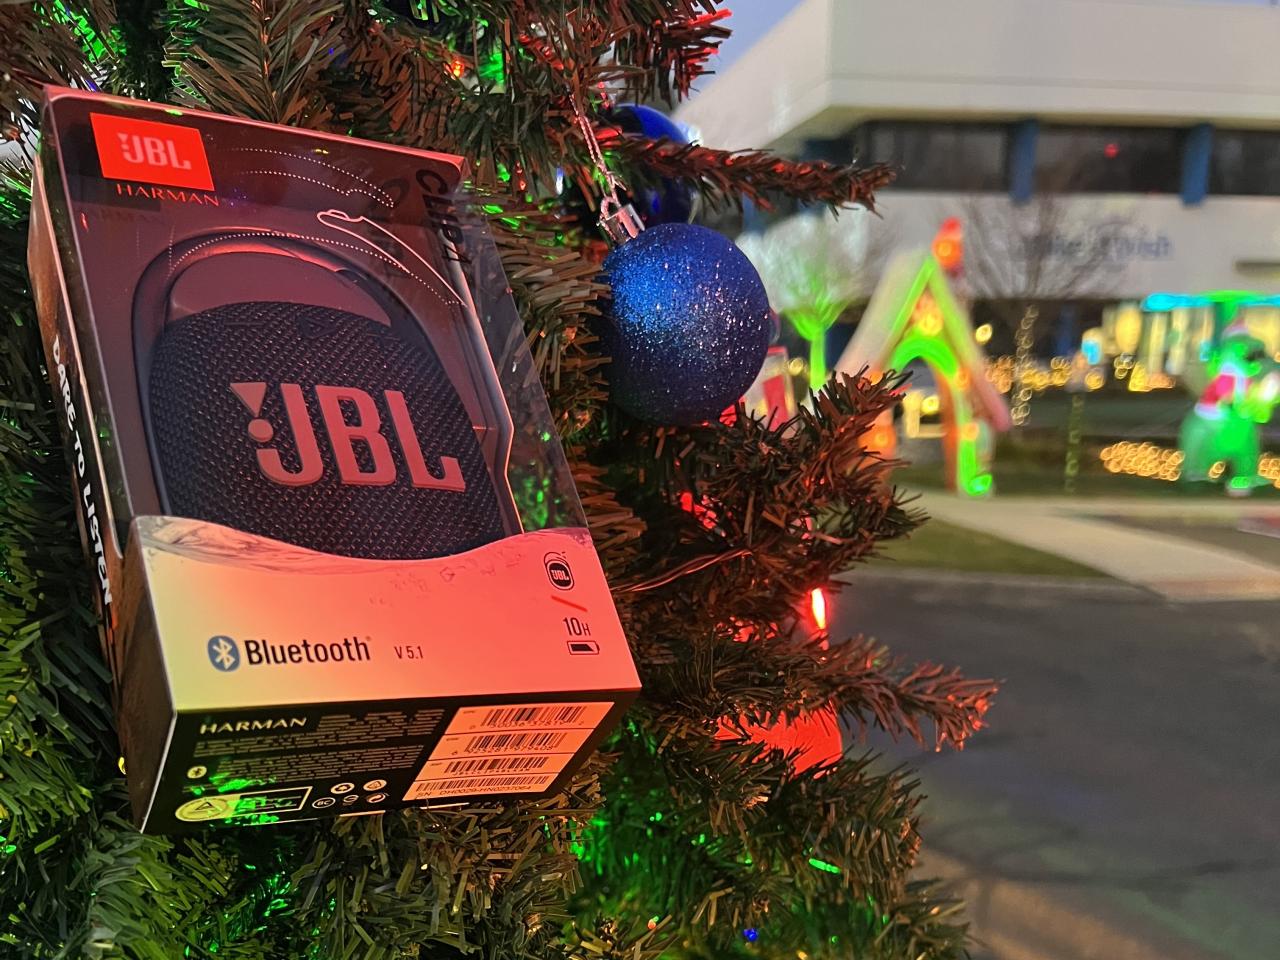 Make A Wish and HARMAN decorated a Christmas tree with JBL products.